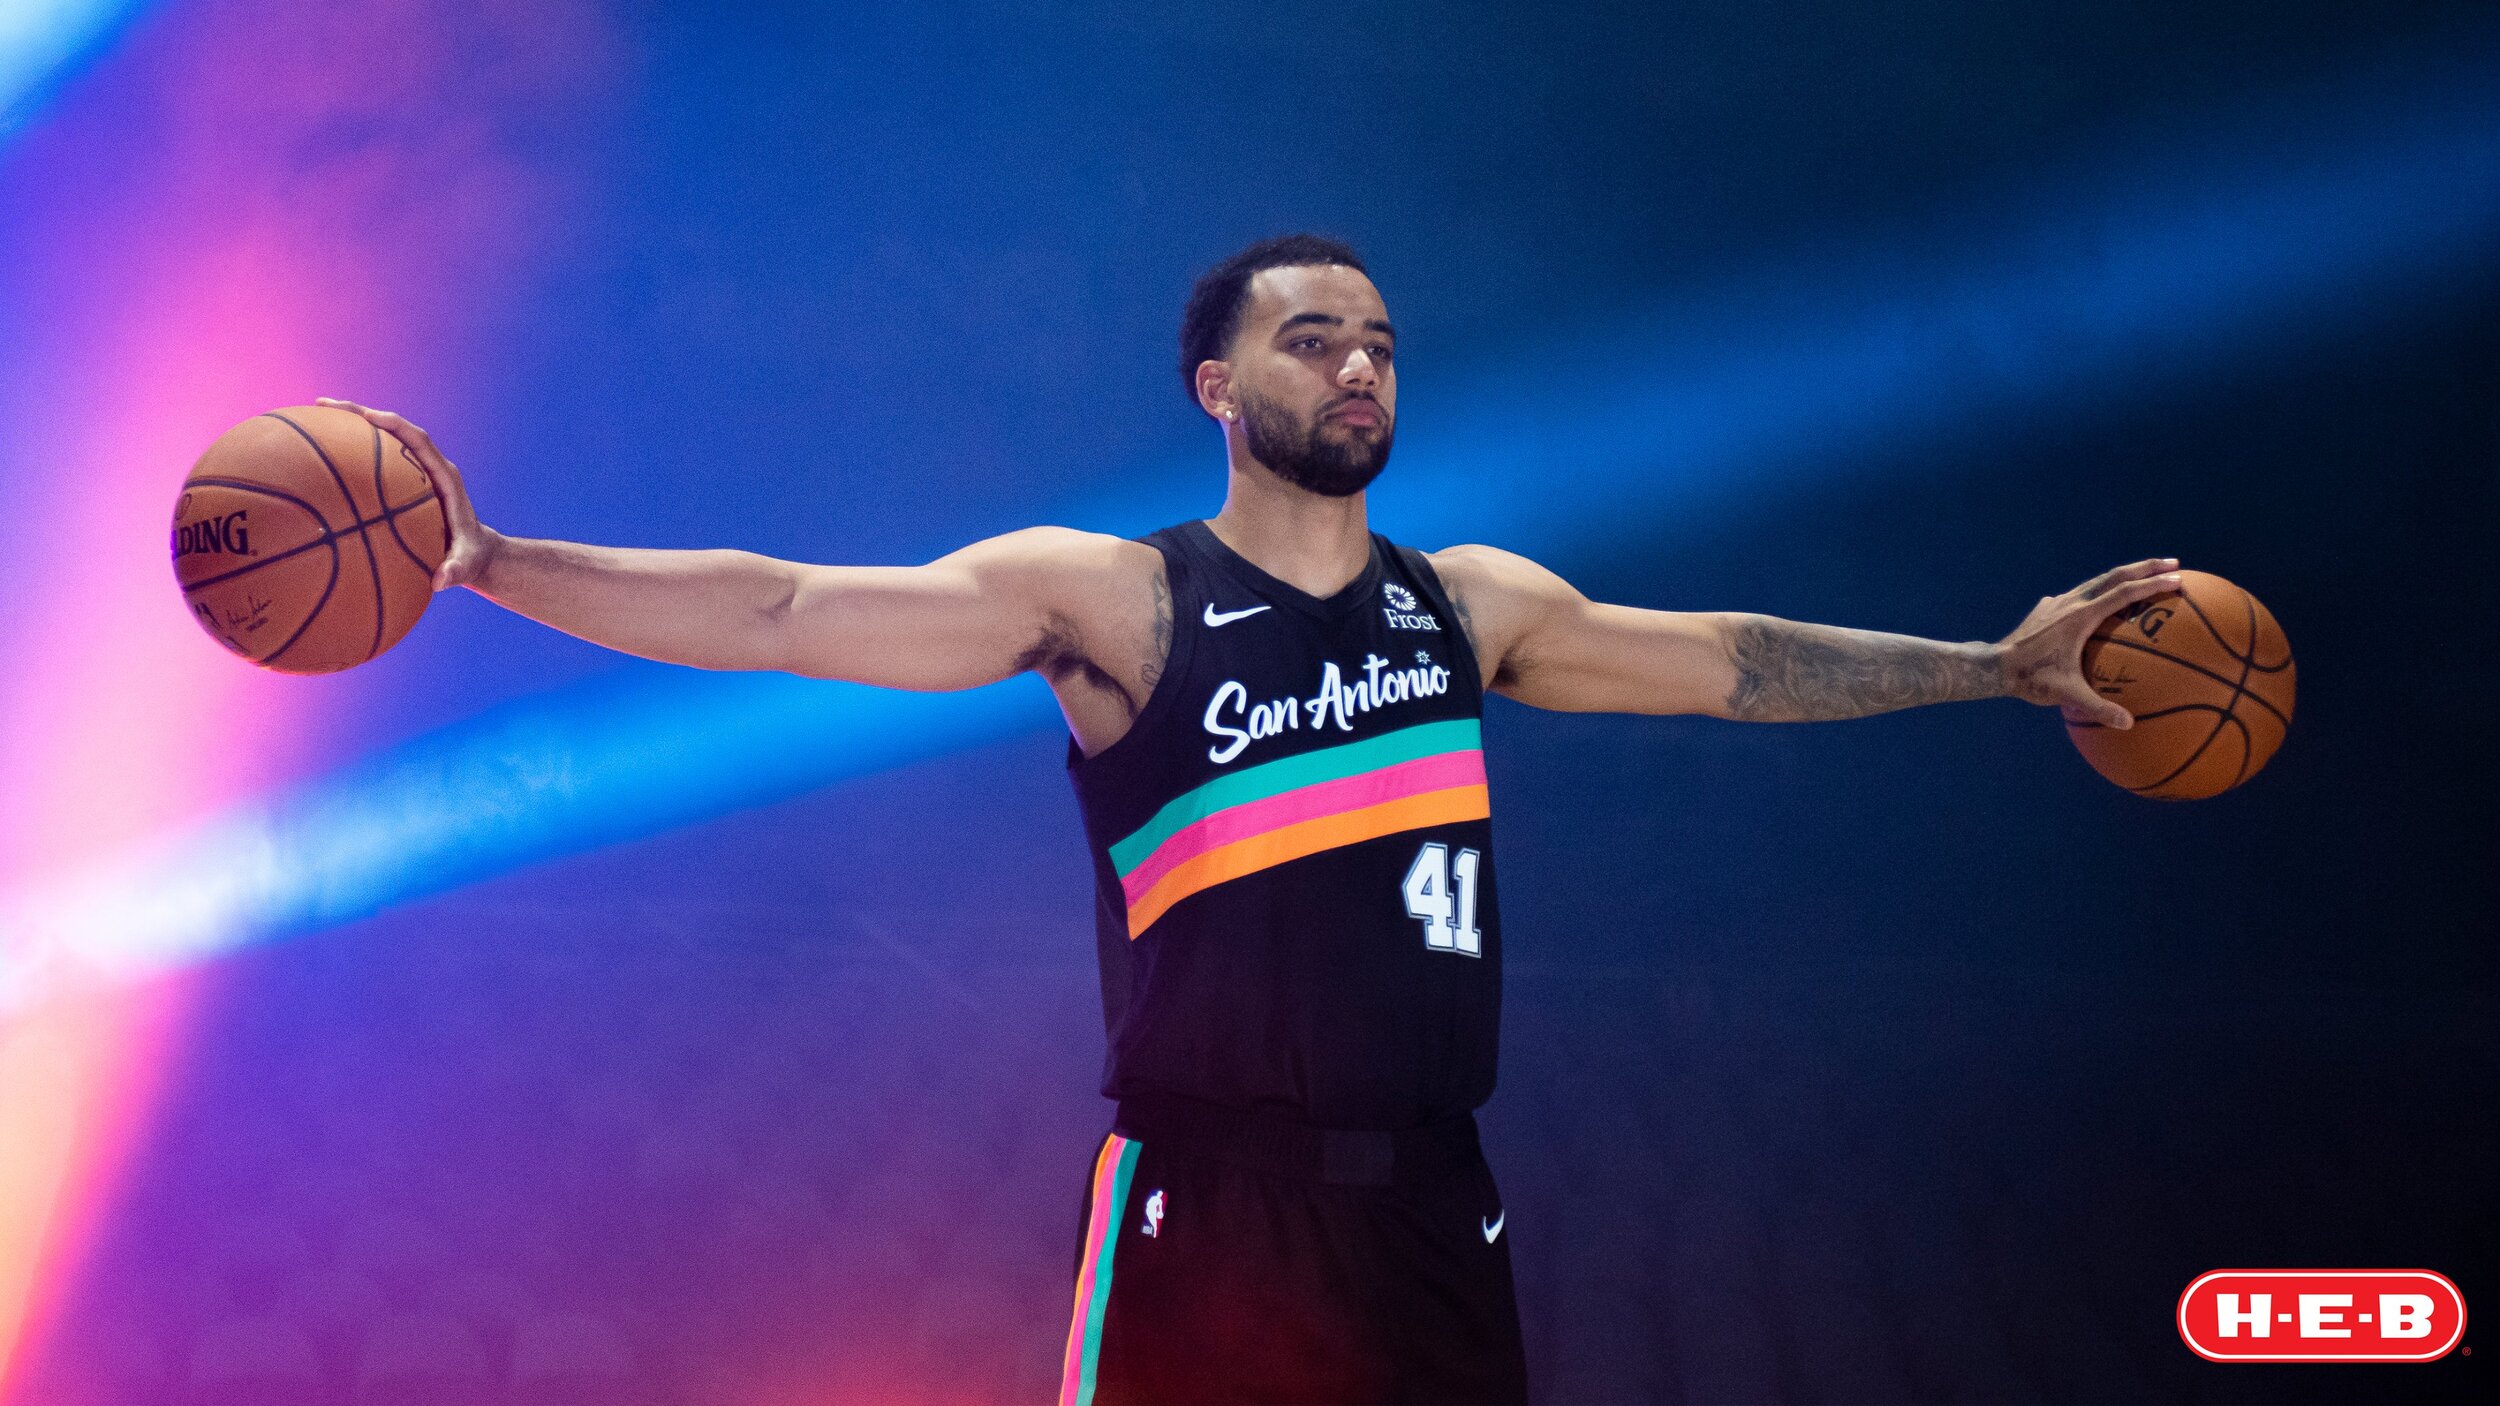 Spurs unveil Fiesta-themed City Edition uniforms to debut on